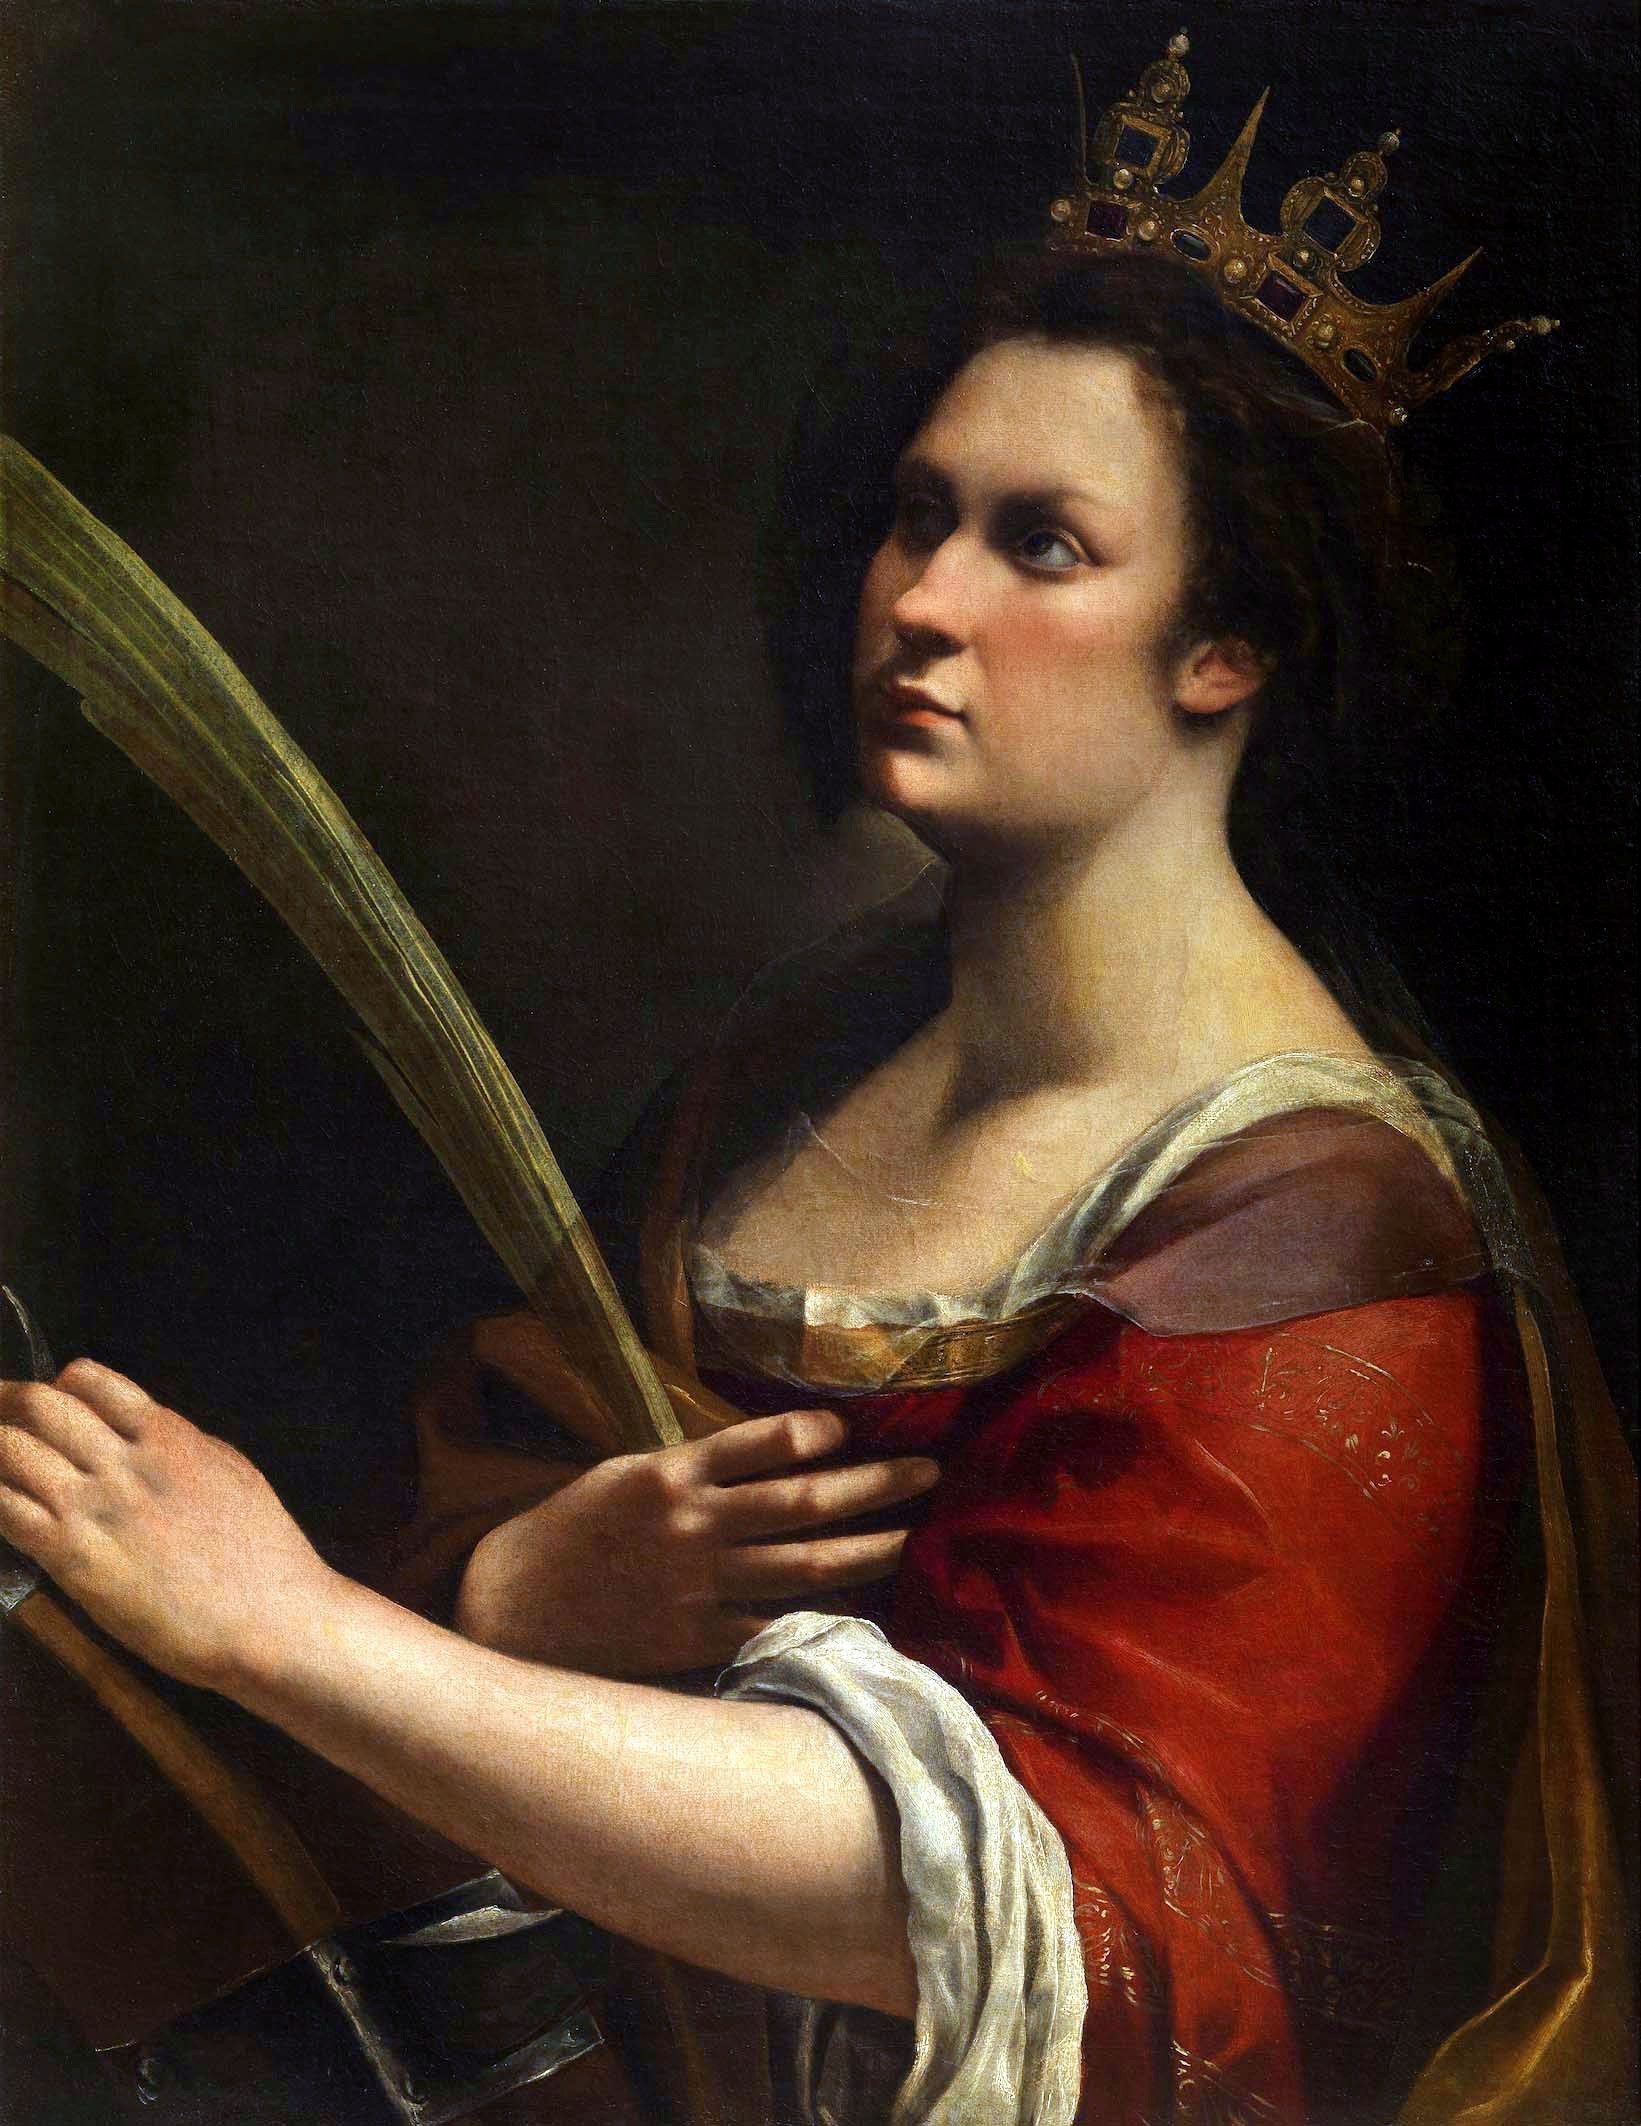 The artist presents herself as Saint Catherine of Alexandria, wearing a red gown with gold embellishments and an ornate gold crown. She appears in half-length, slightly turned and looking away from the viewer. In one hand she holds the martyr’s palm frond and in the other, a broken spiked wheel that symbolizes her martyrdom. 